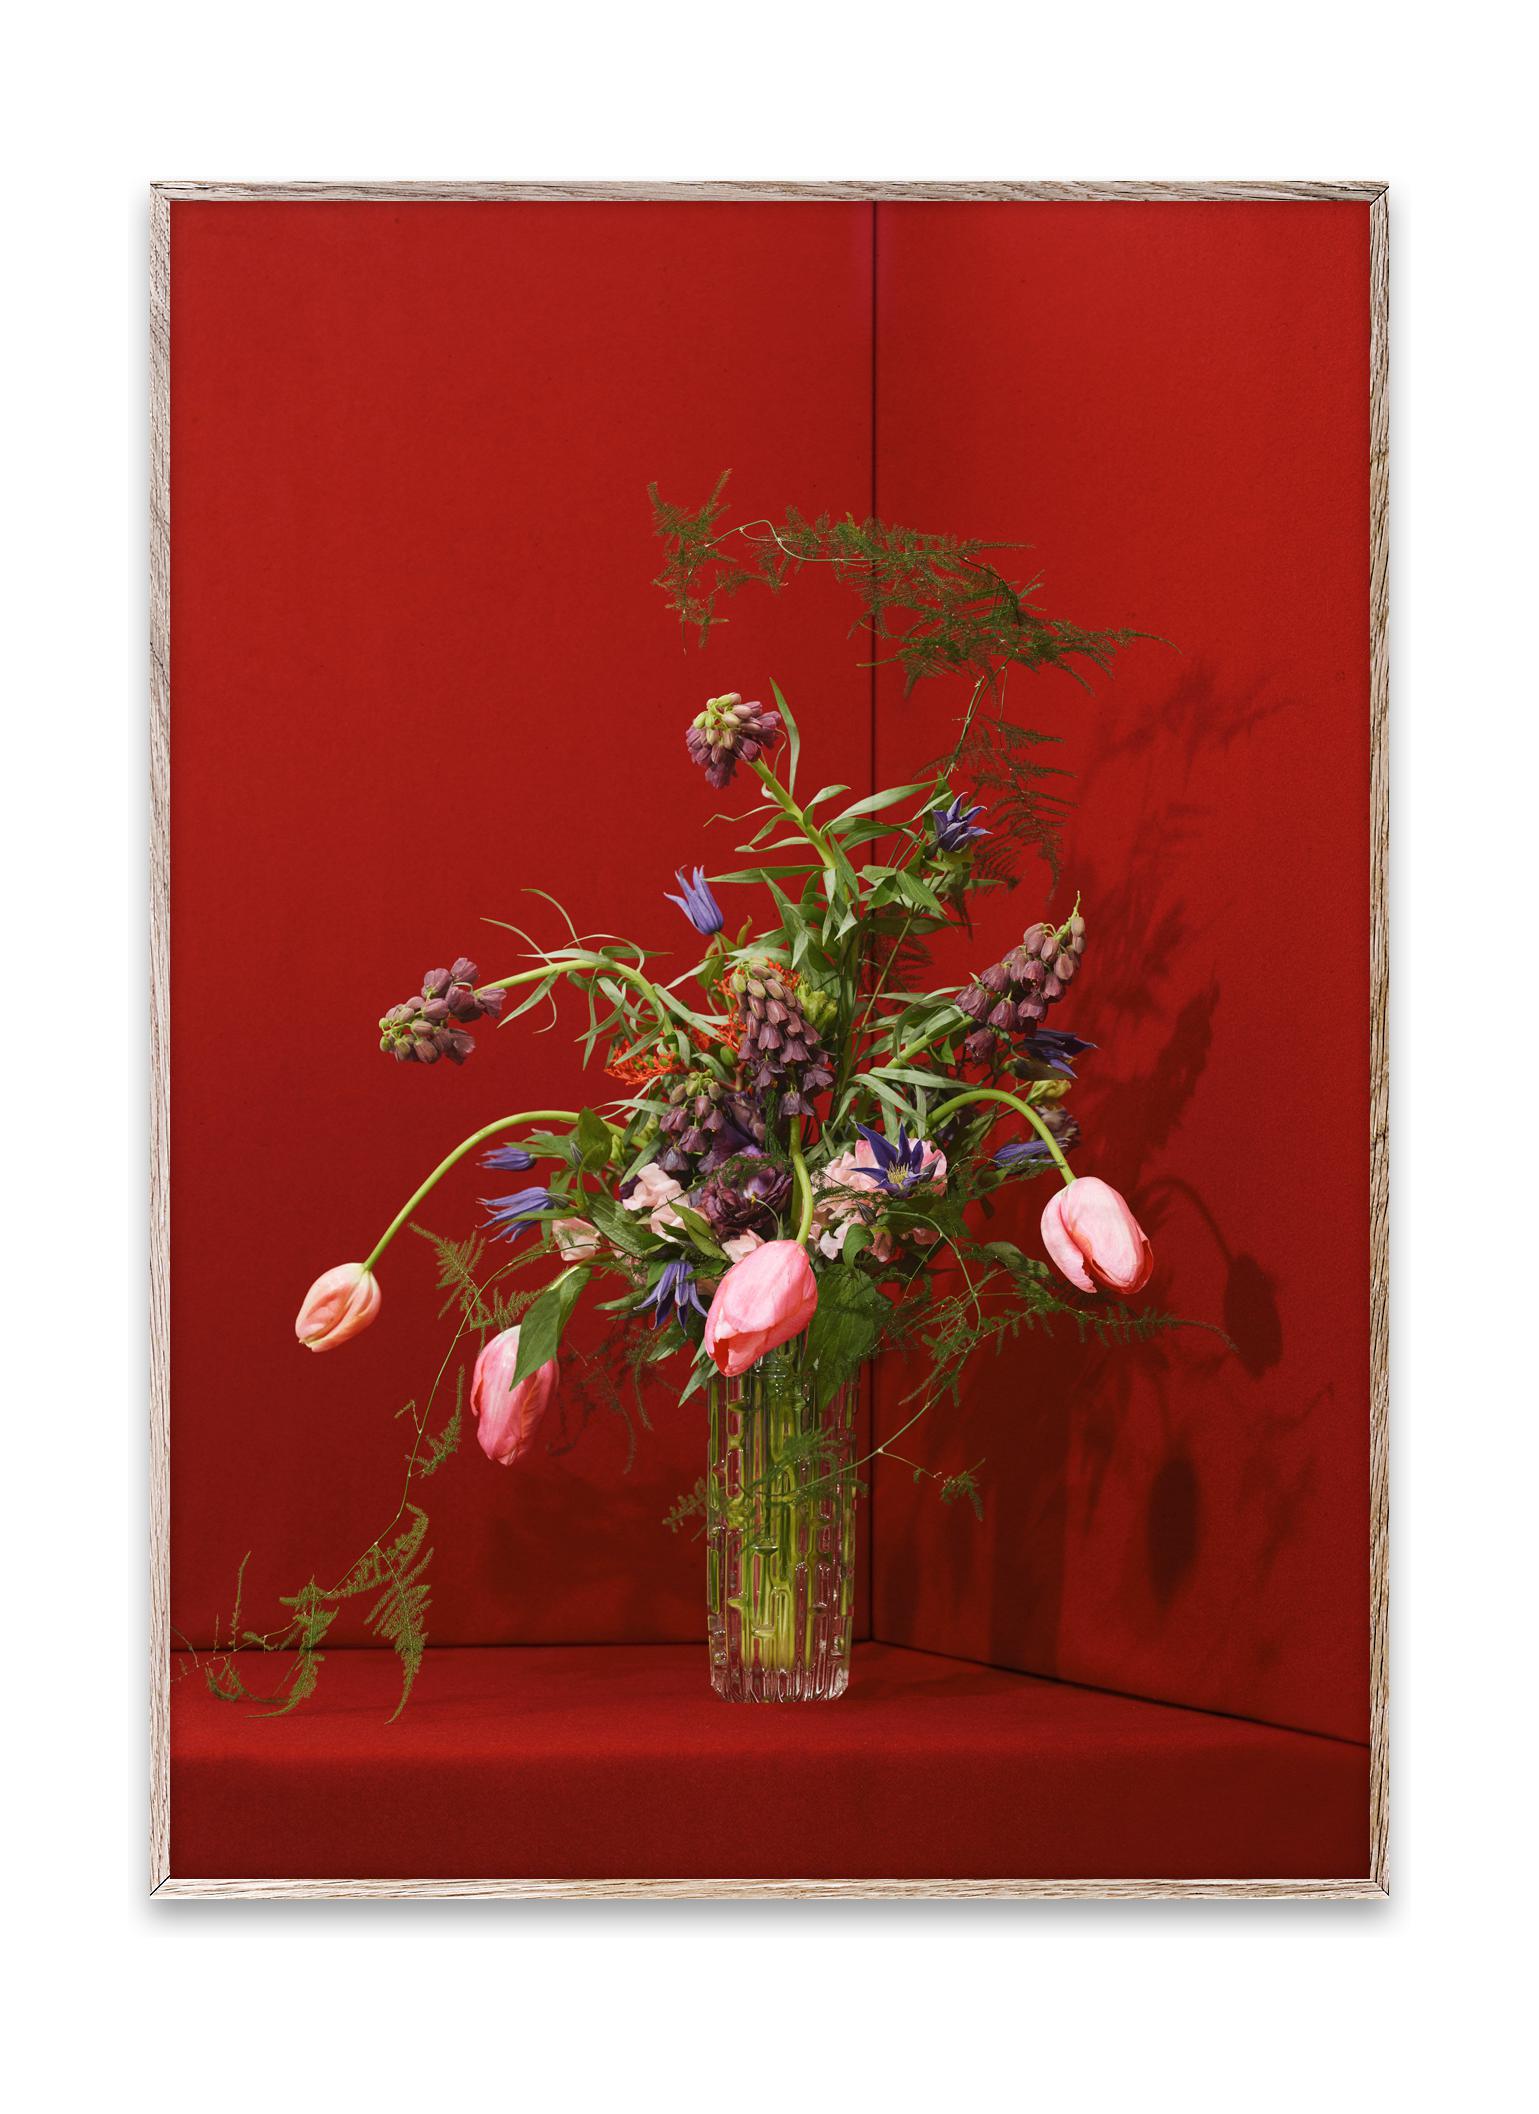 Paper Collective Blomst 03 Affiche 30x40 cm, rouge